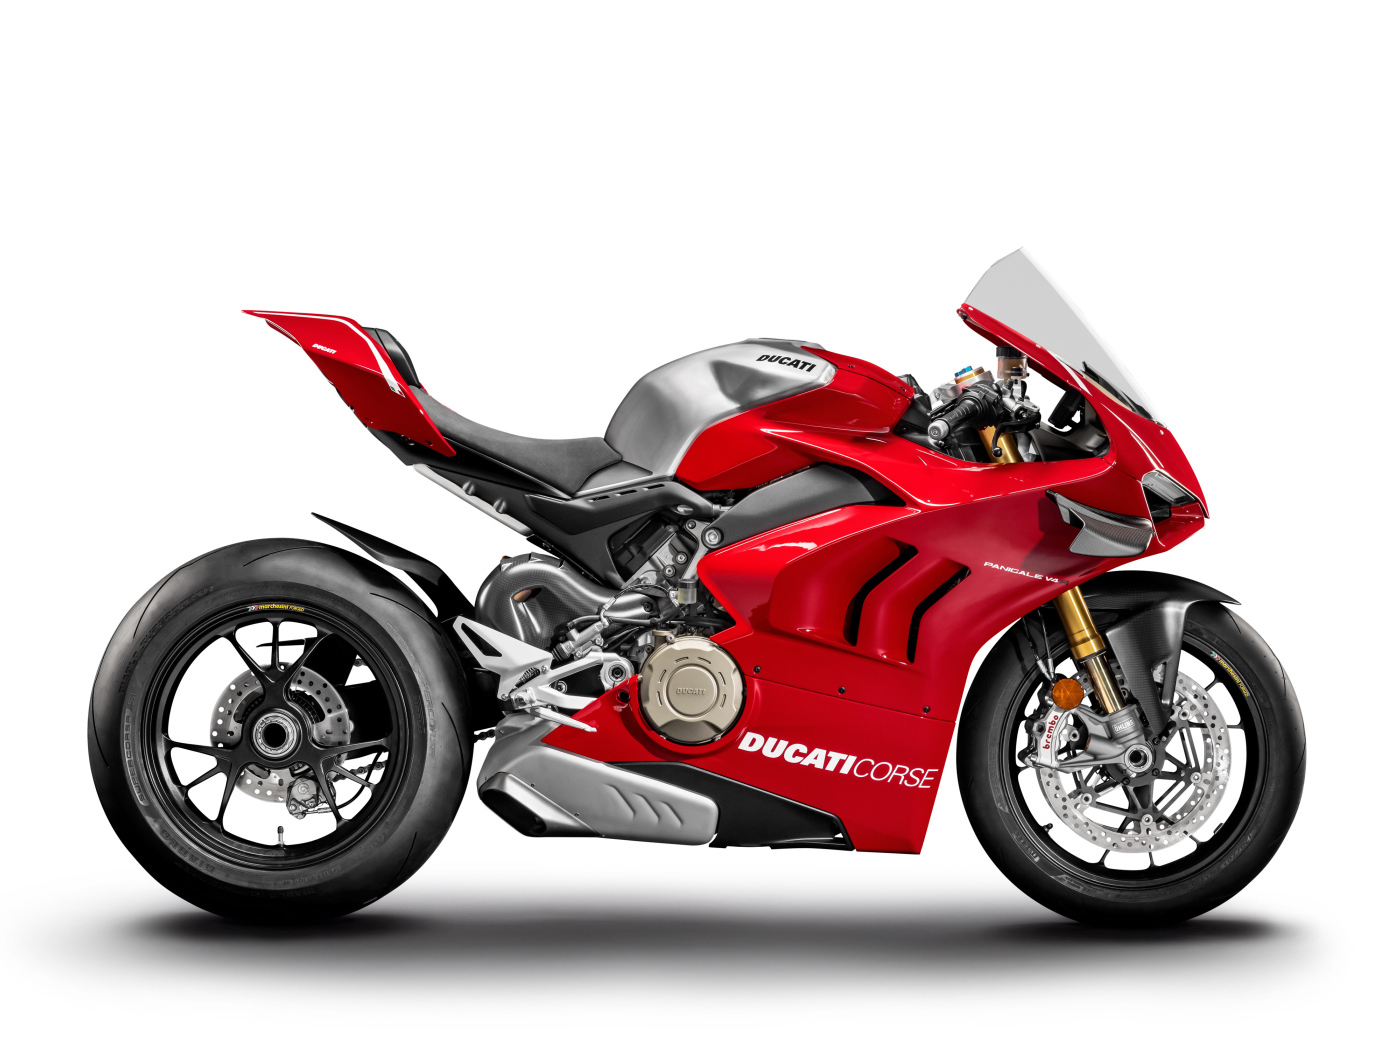 Red motorcycle Ducati Panigale V4 on a white background